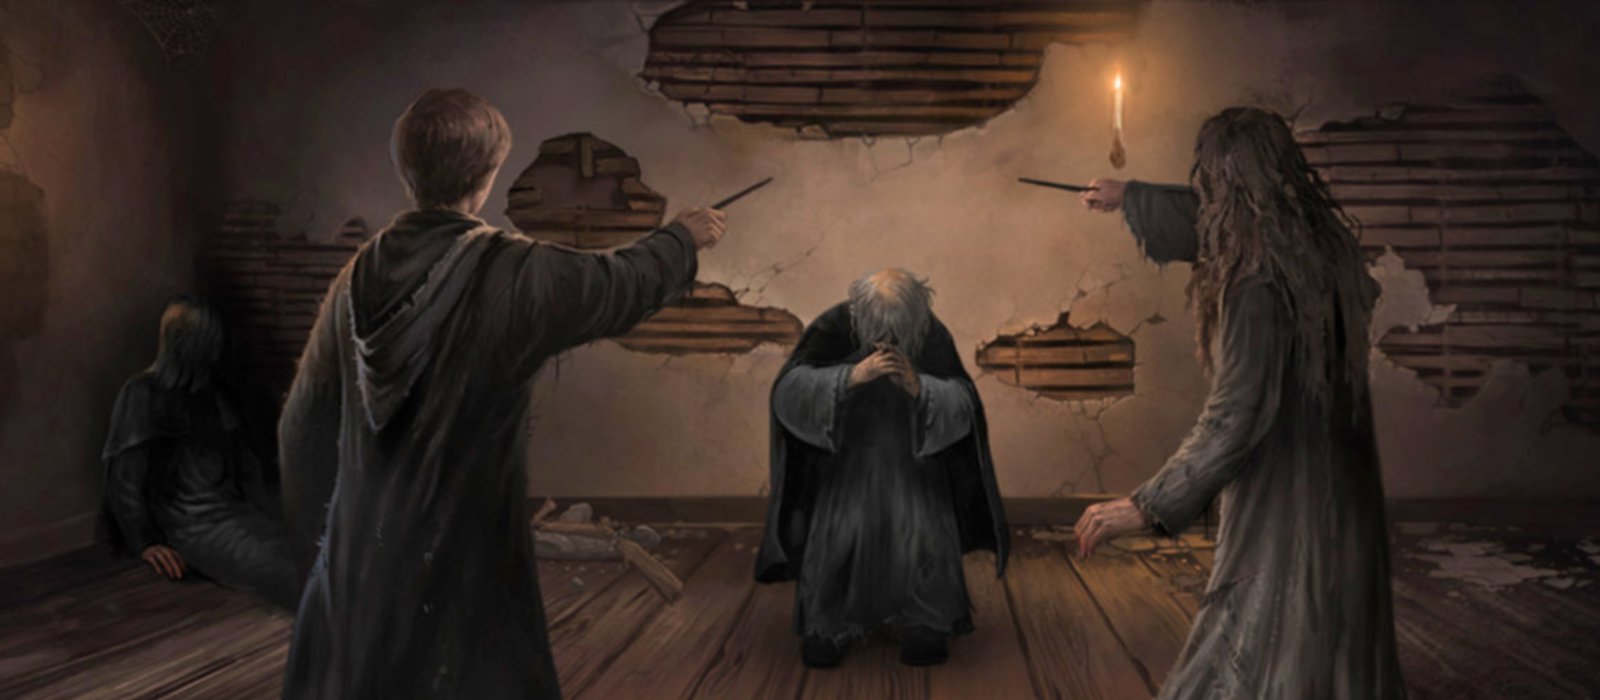 Pottermore Moments Revisited: Tales in the Moonlight